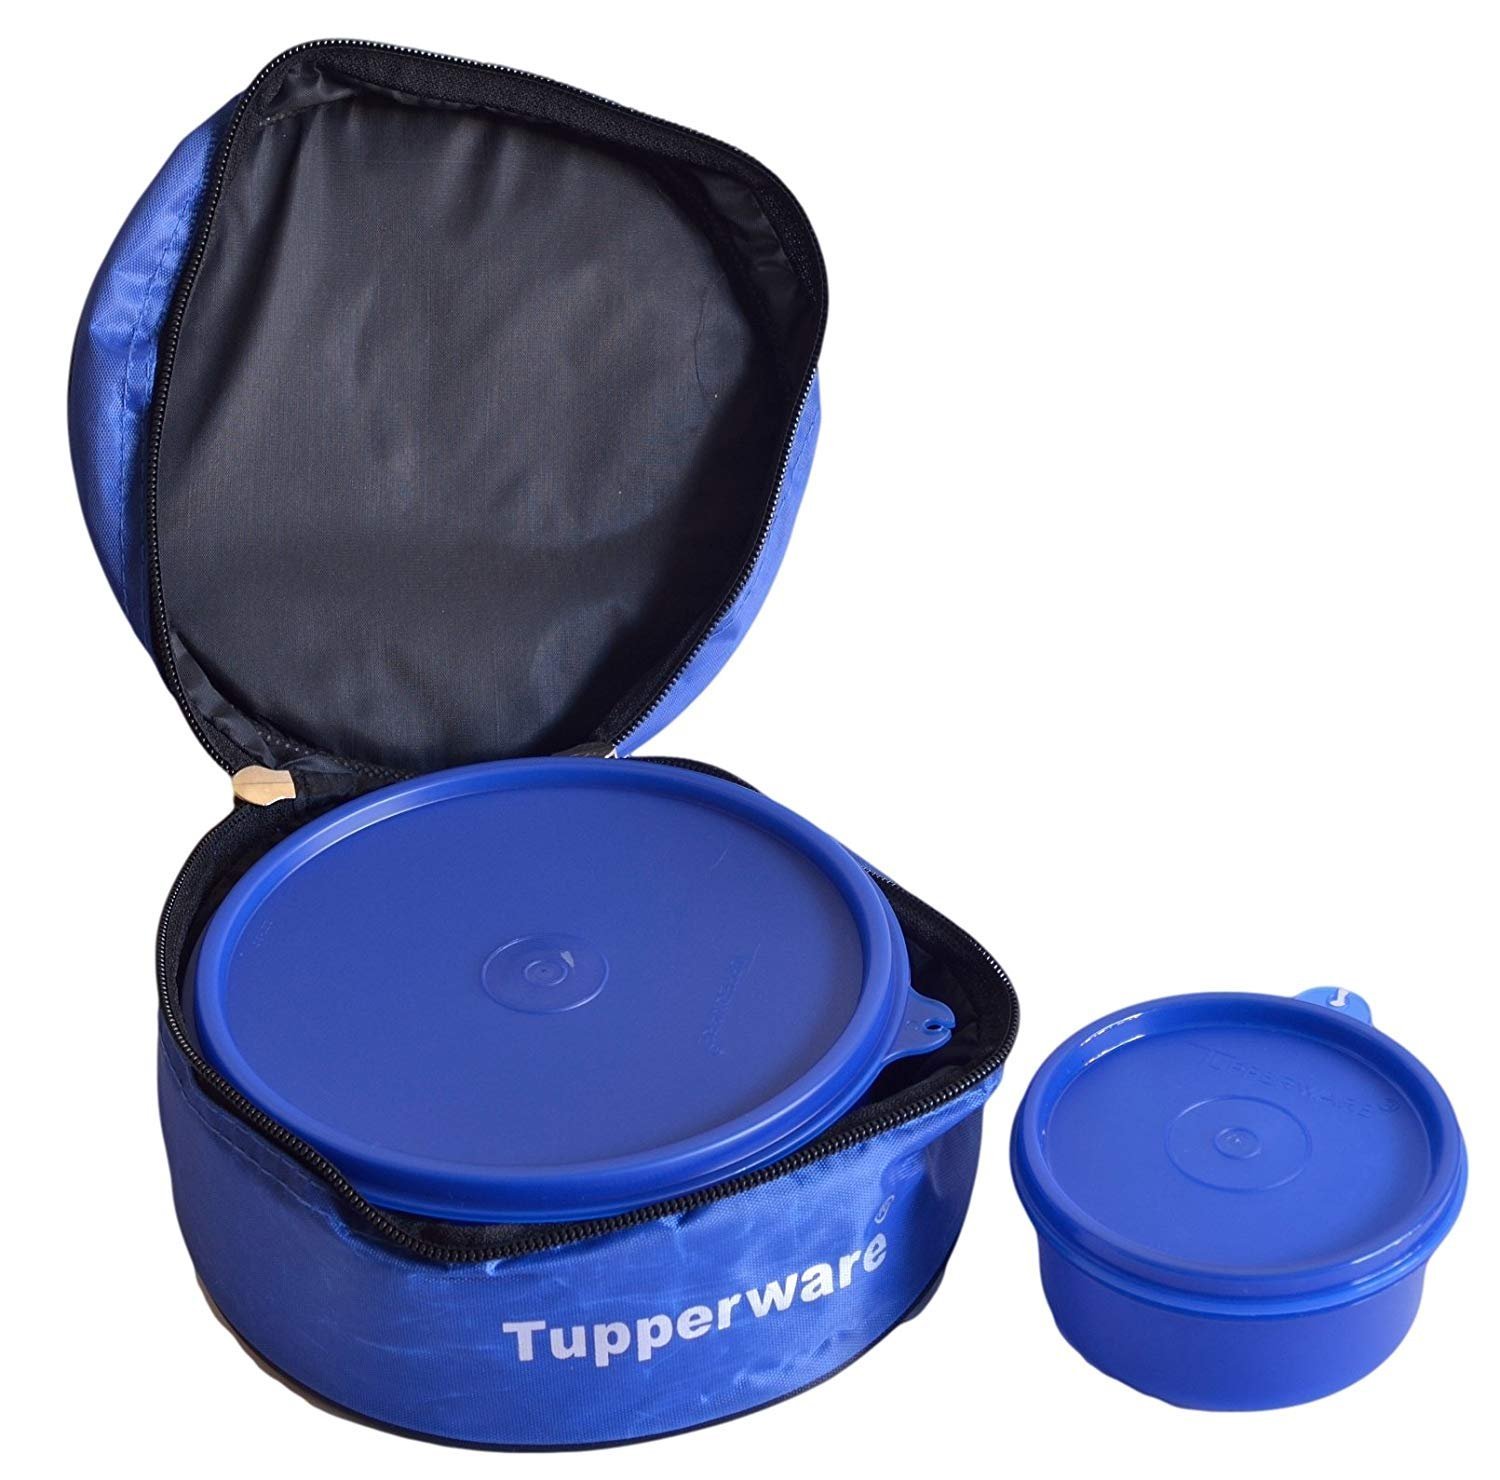 Tupperware Classic Plastic Lunch Box with Bag,2-Pieces, Blue